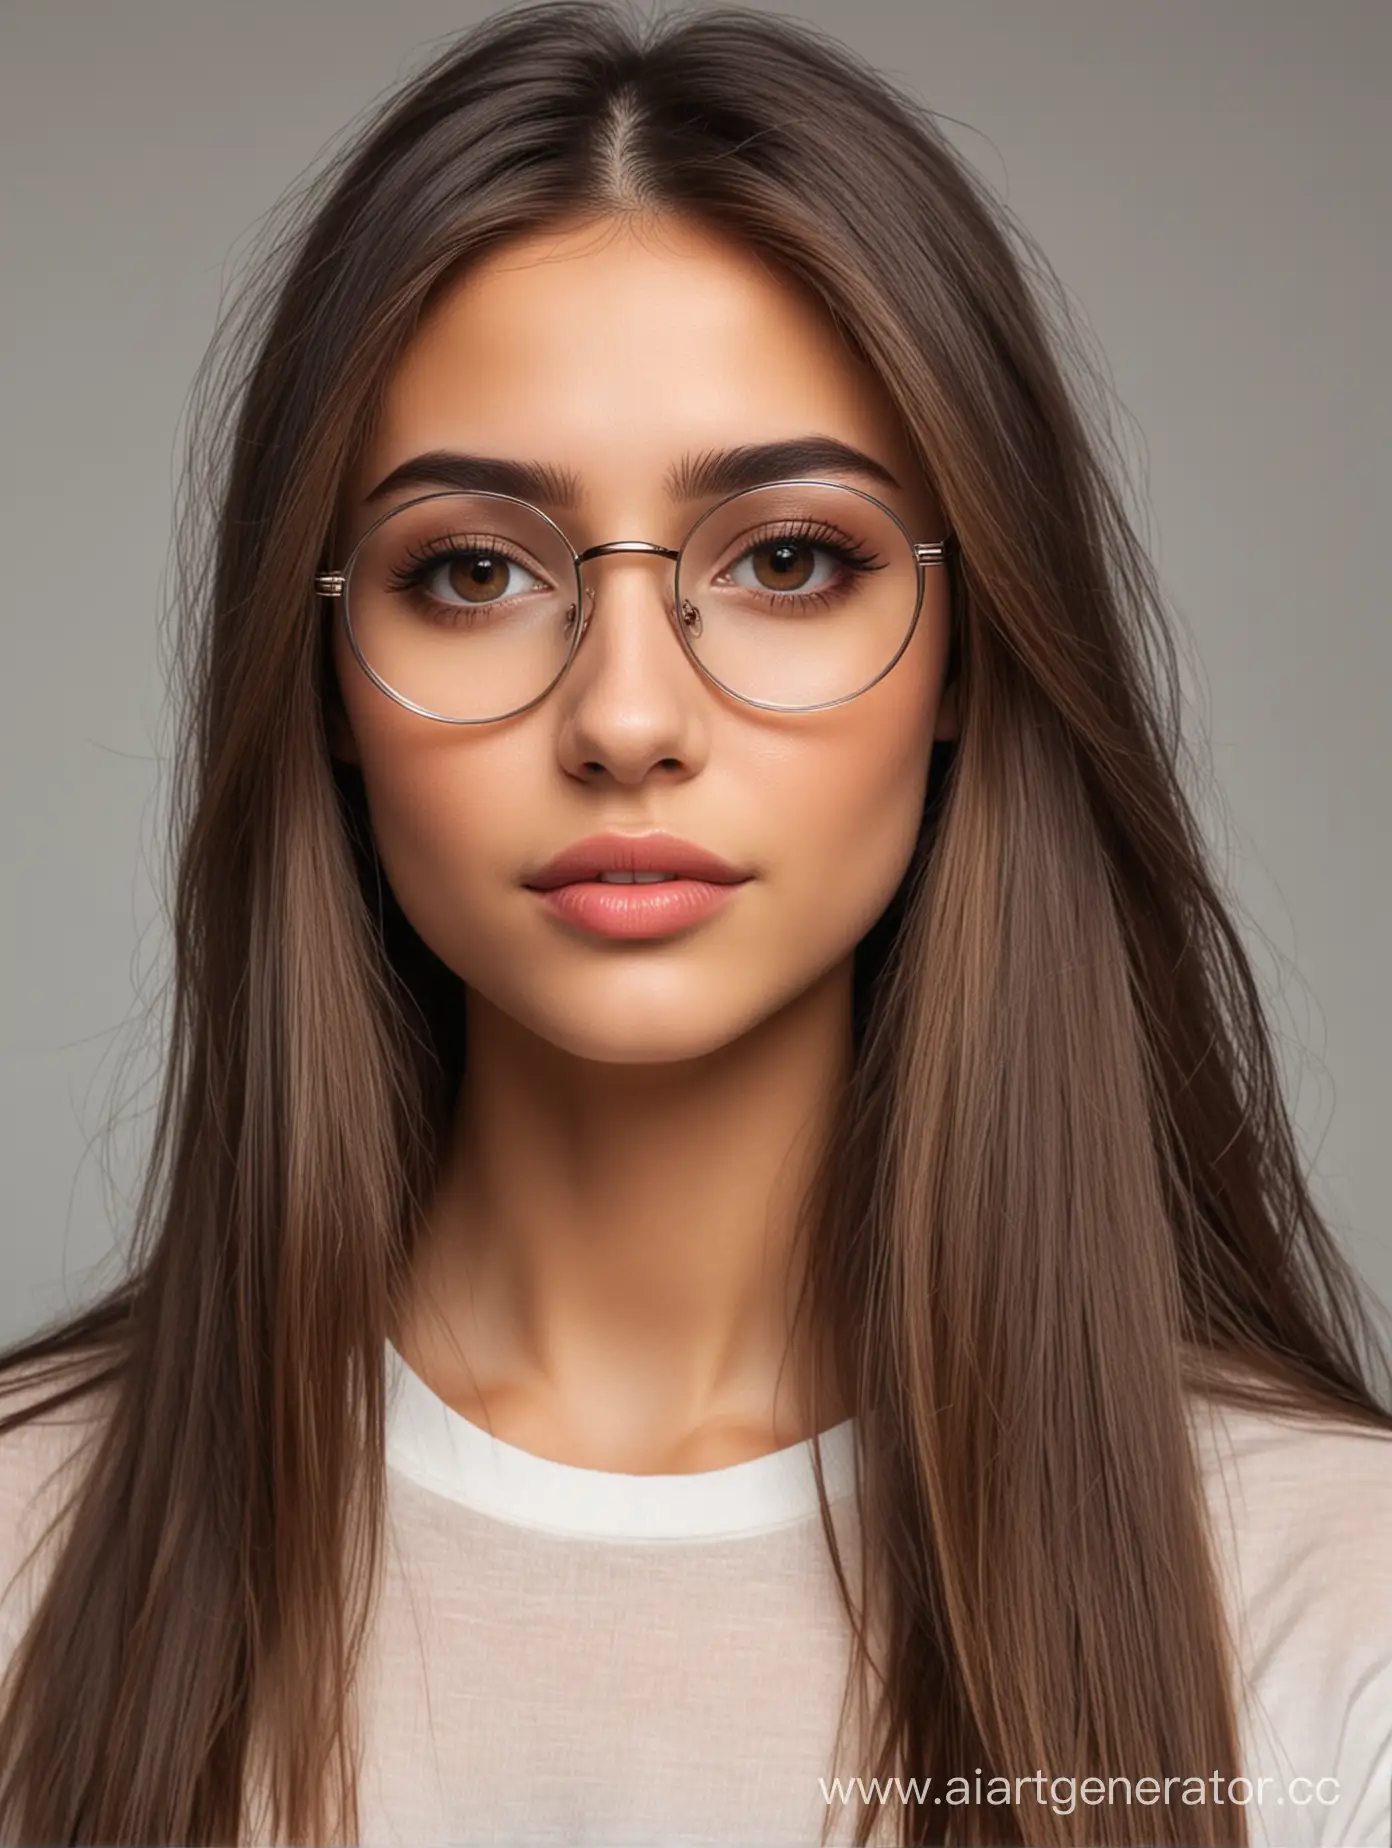 Captivating-Brunette-Girl-with-Round-Glasses-and-Long-Hair-Steals-Hearts